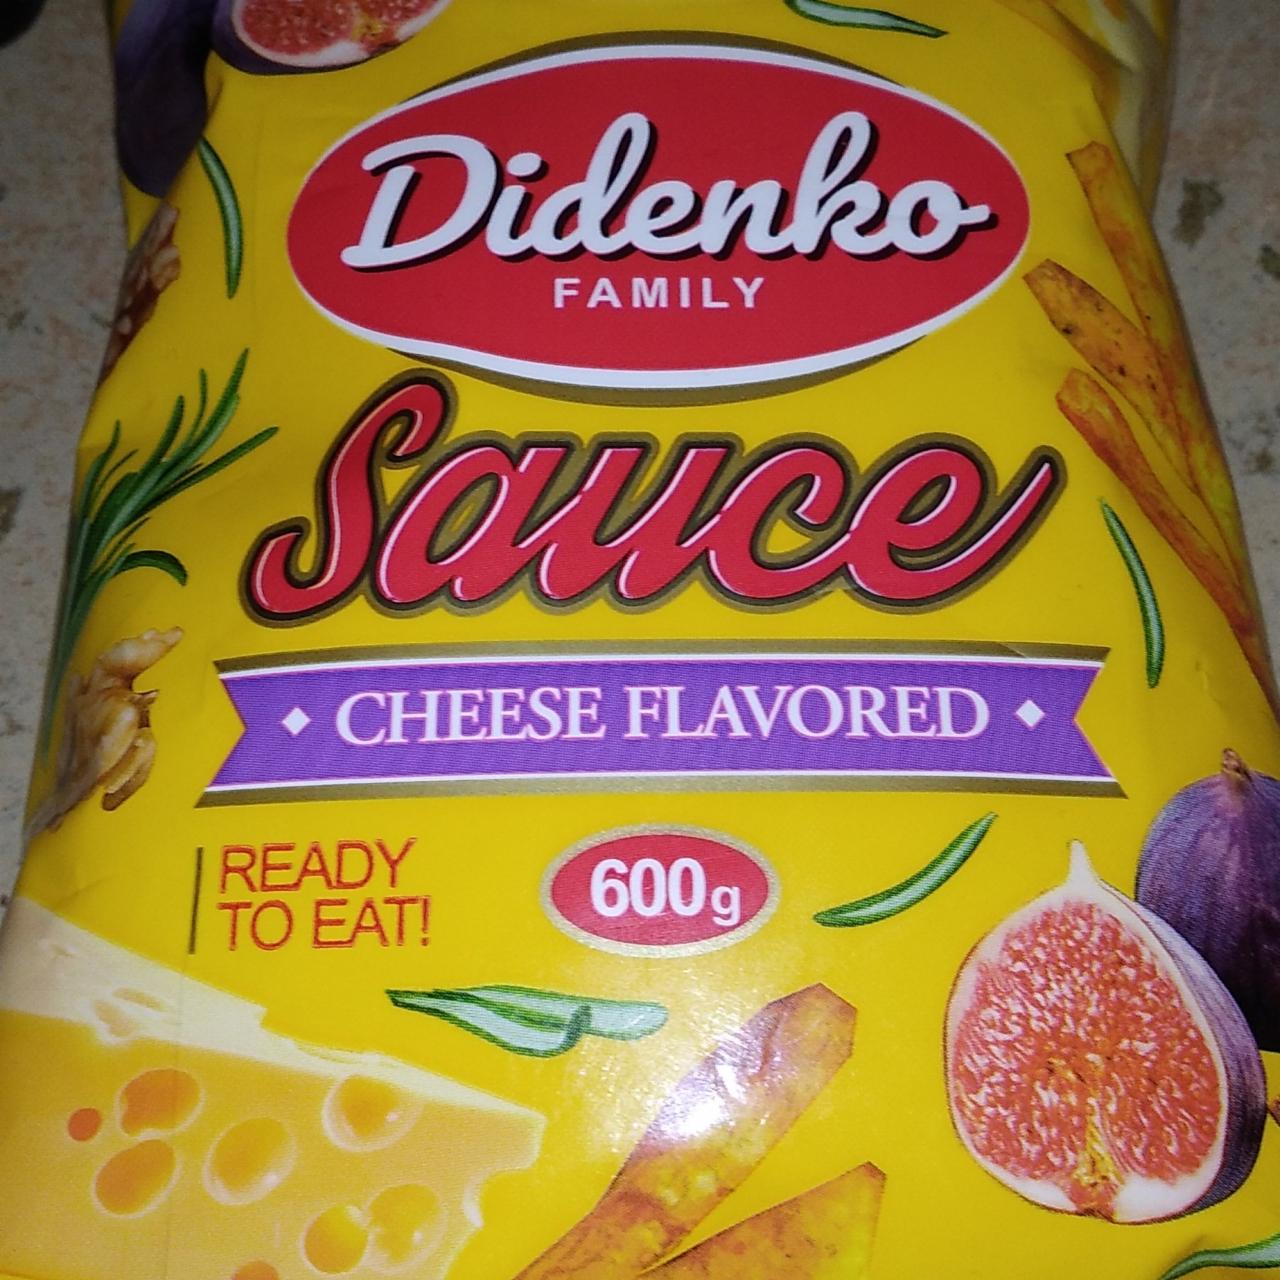 Fotografie - Sauce Cheese Flavored Didenko family